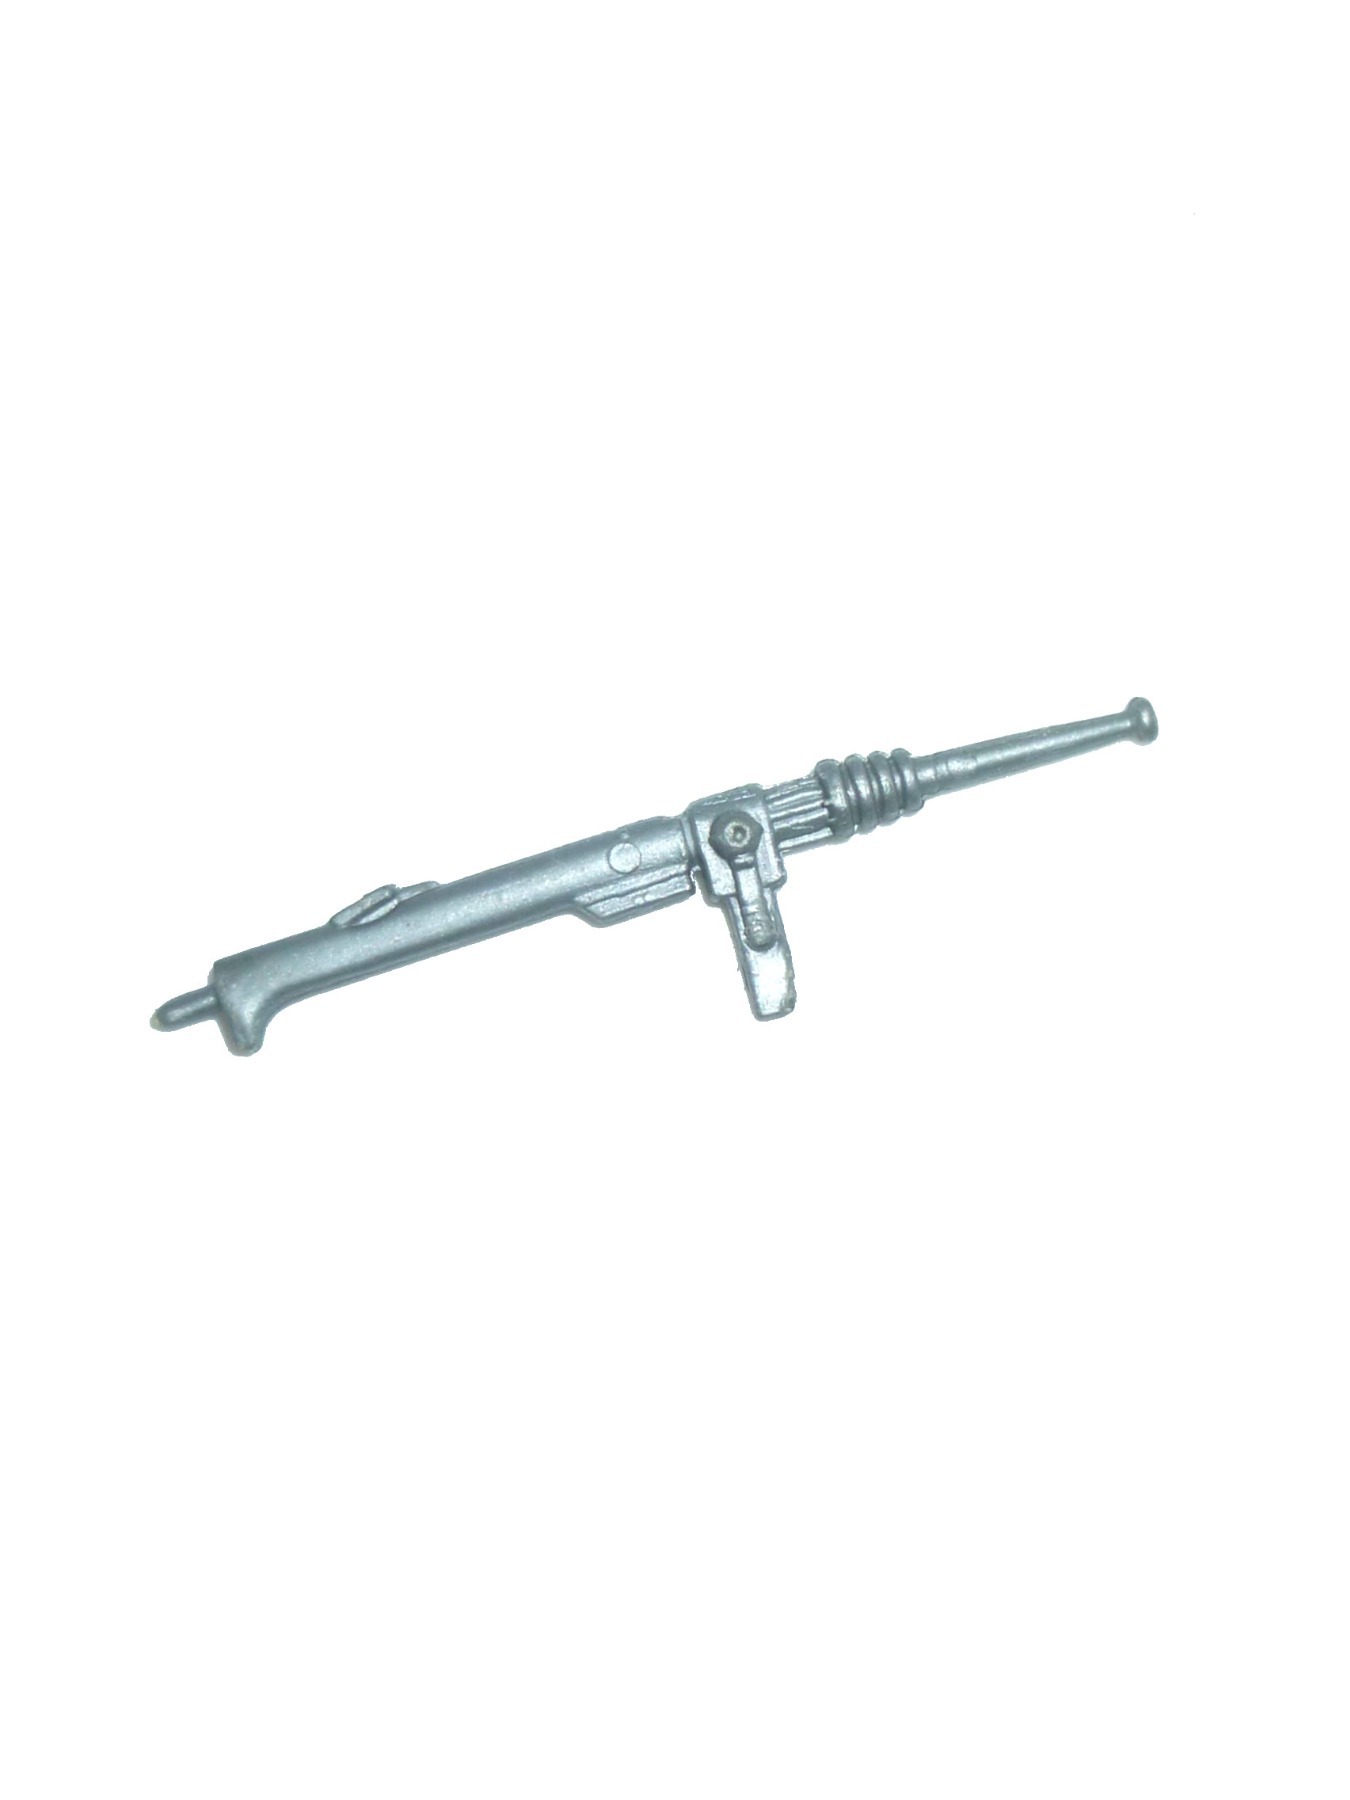 Dr. Mindbender weapon gray accessory